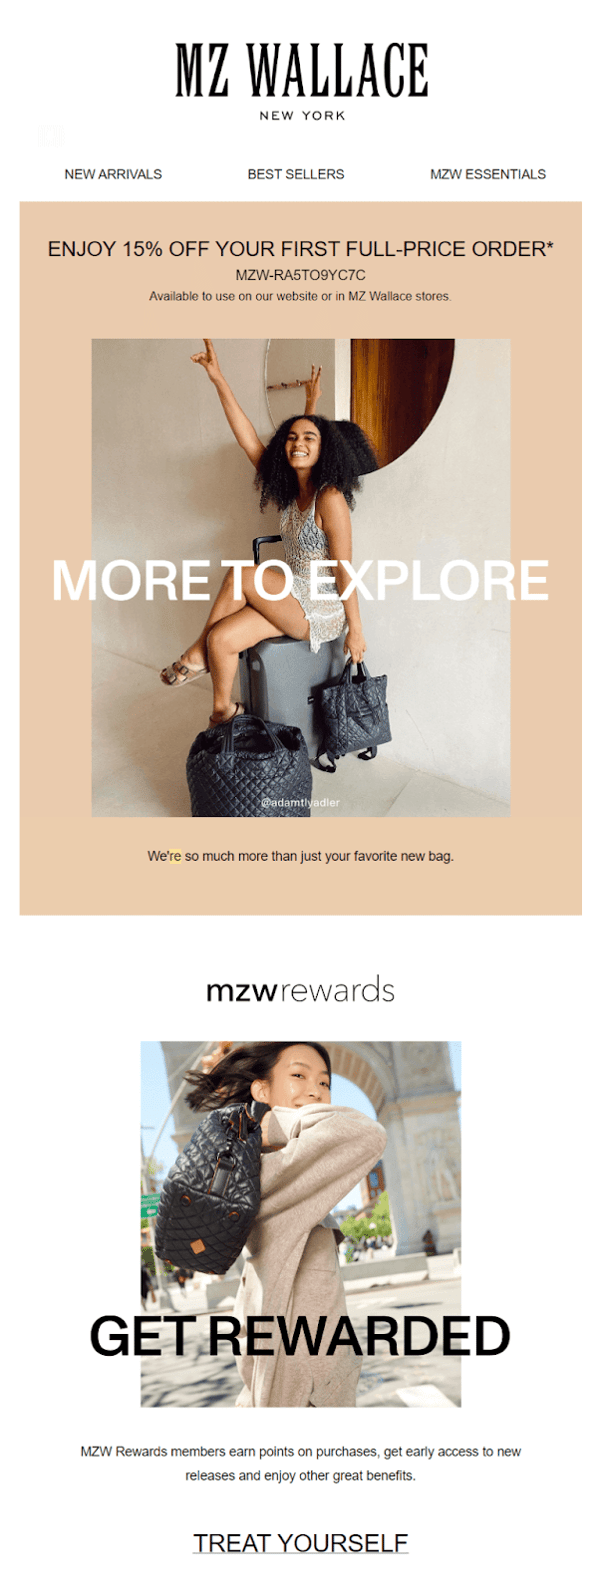 mz wallace welcome emails series loyalty rewards (1)